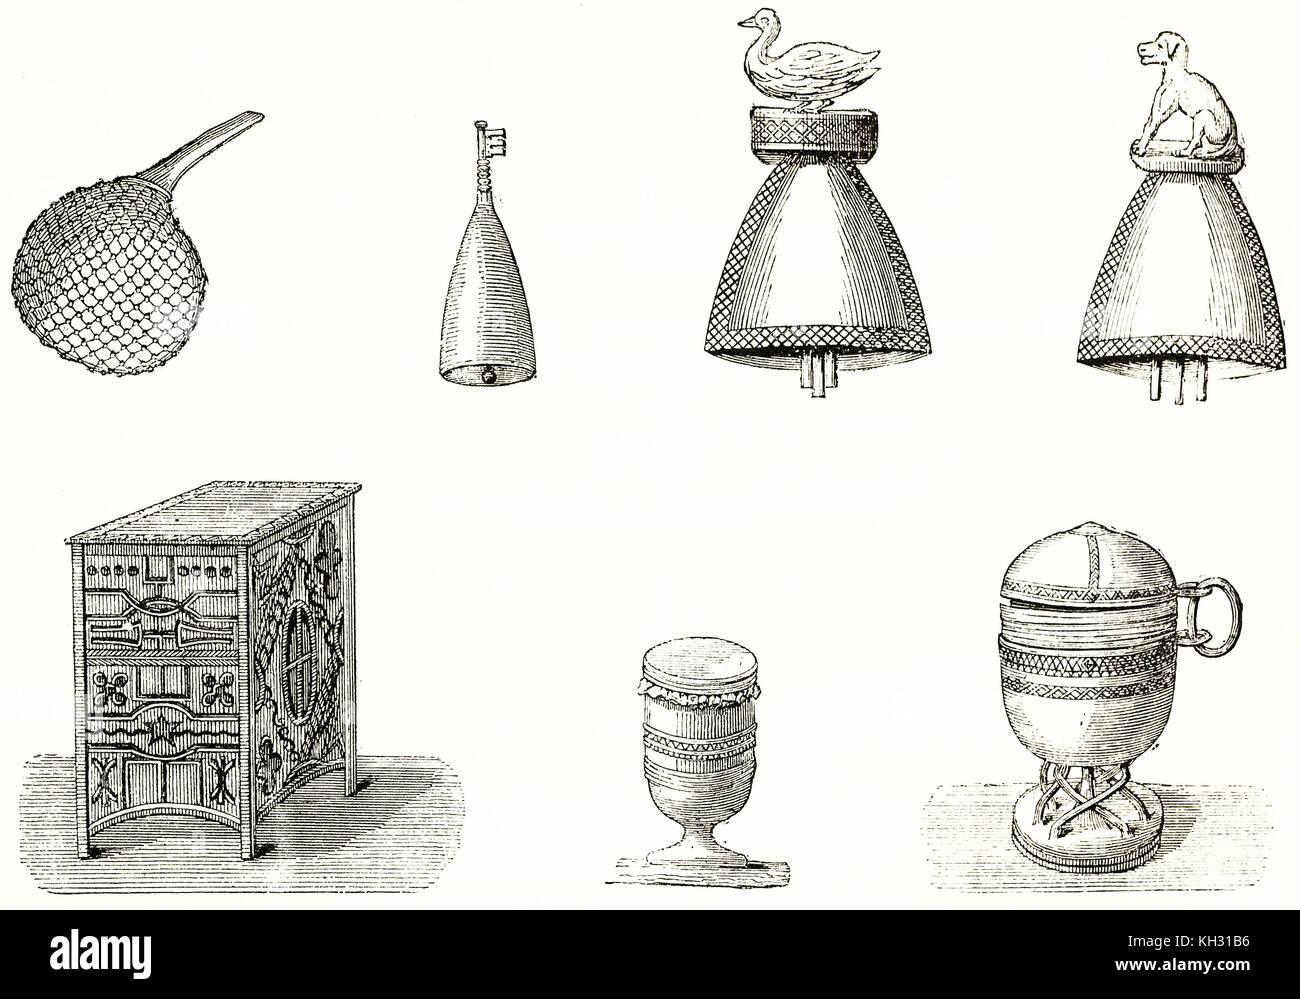 Old illustration of instruments and utensils from Dahomey (nowadays Benin). By Foulquier, publ. on le Tour du Monde, Paris, 1863 Stock Photo